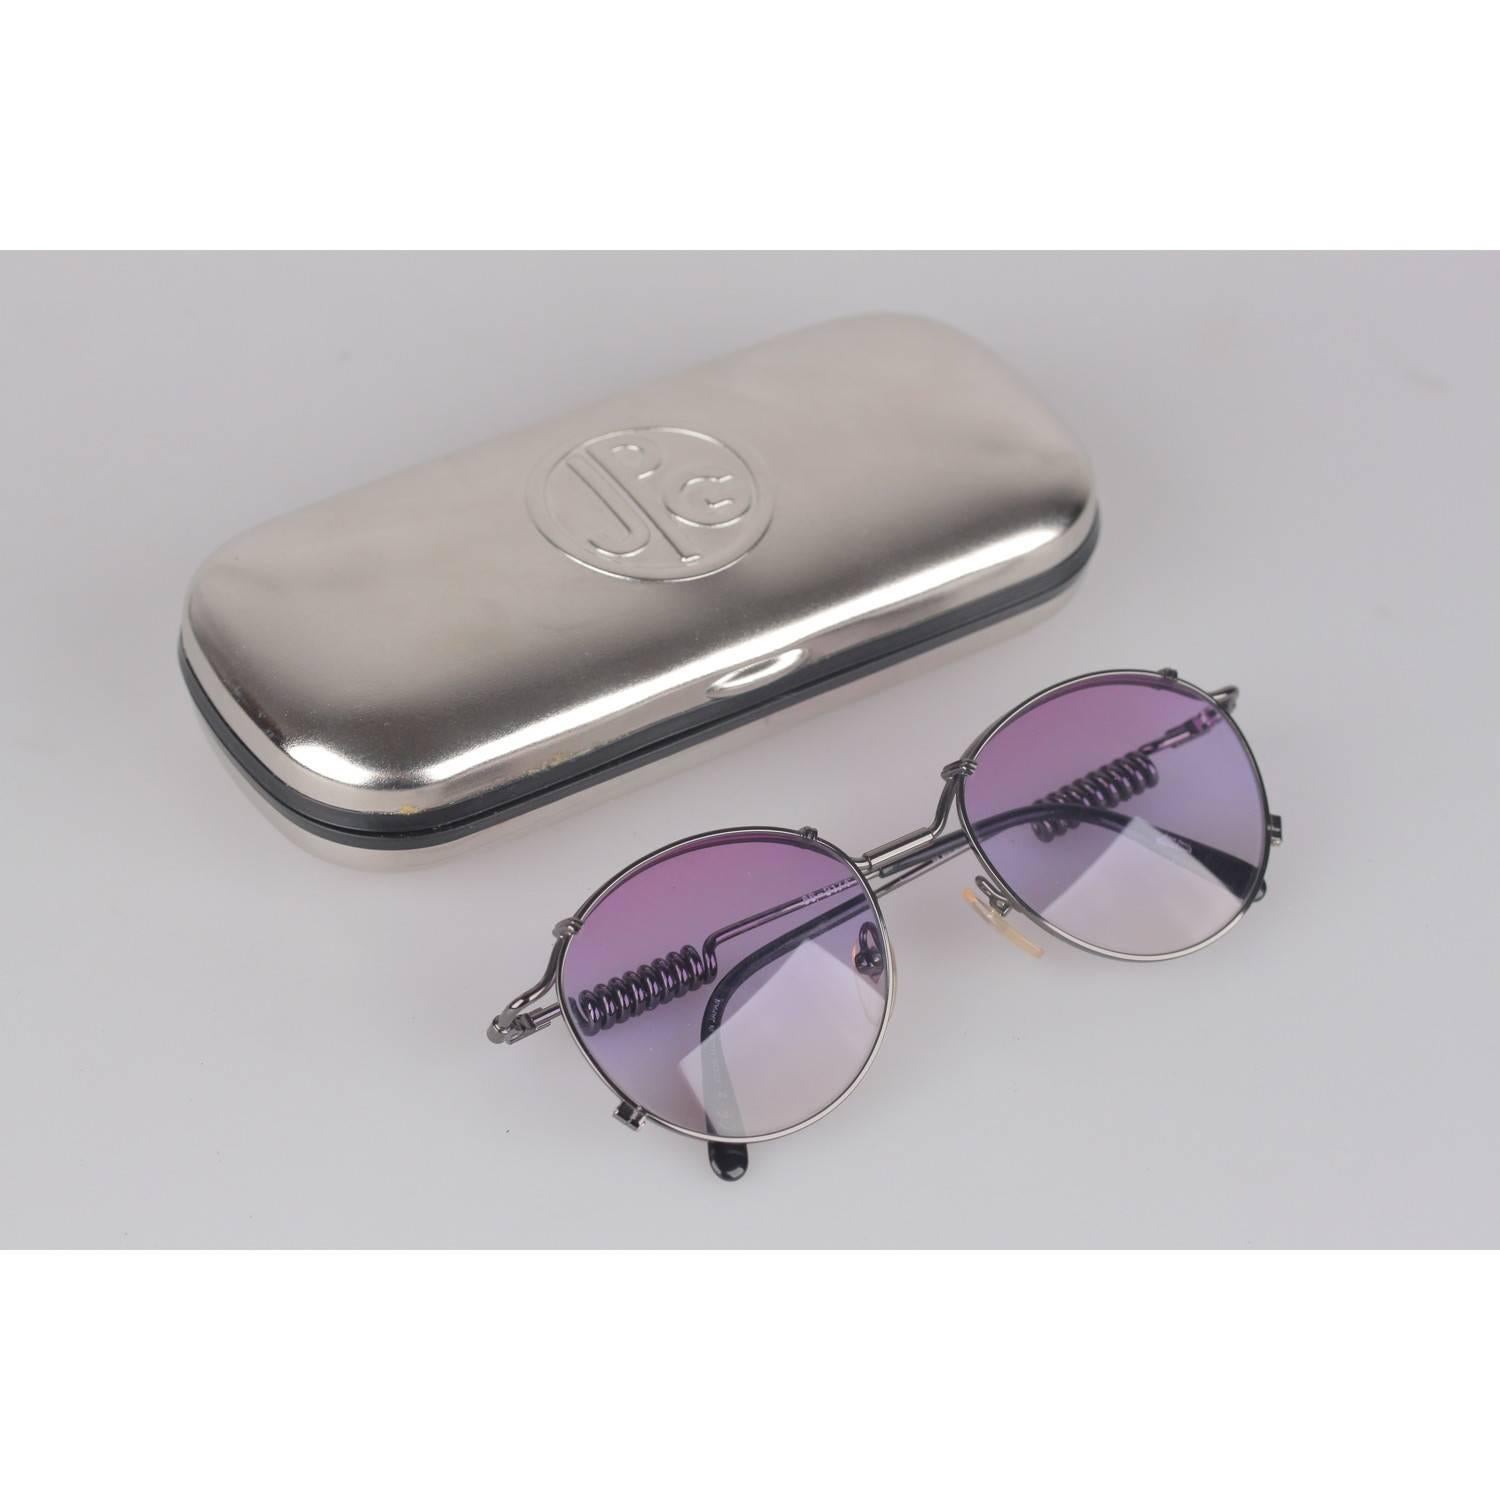 Original Vintage 1990s JEAN PAUL GAULTIER Unisex Sunglasses
Iconic Model, very rare - SPRINGS on the sides - Steampunk Look
Dark Gray Frame, light purple gradient lens
Frame Made in Japan
Mod. 56-5174
New Old Stock - Never Worn or USed - they will